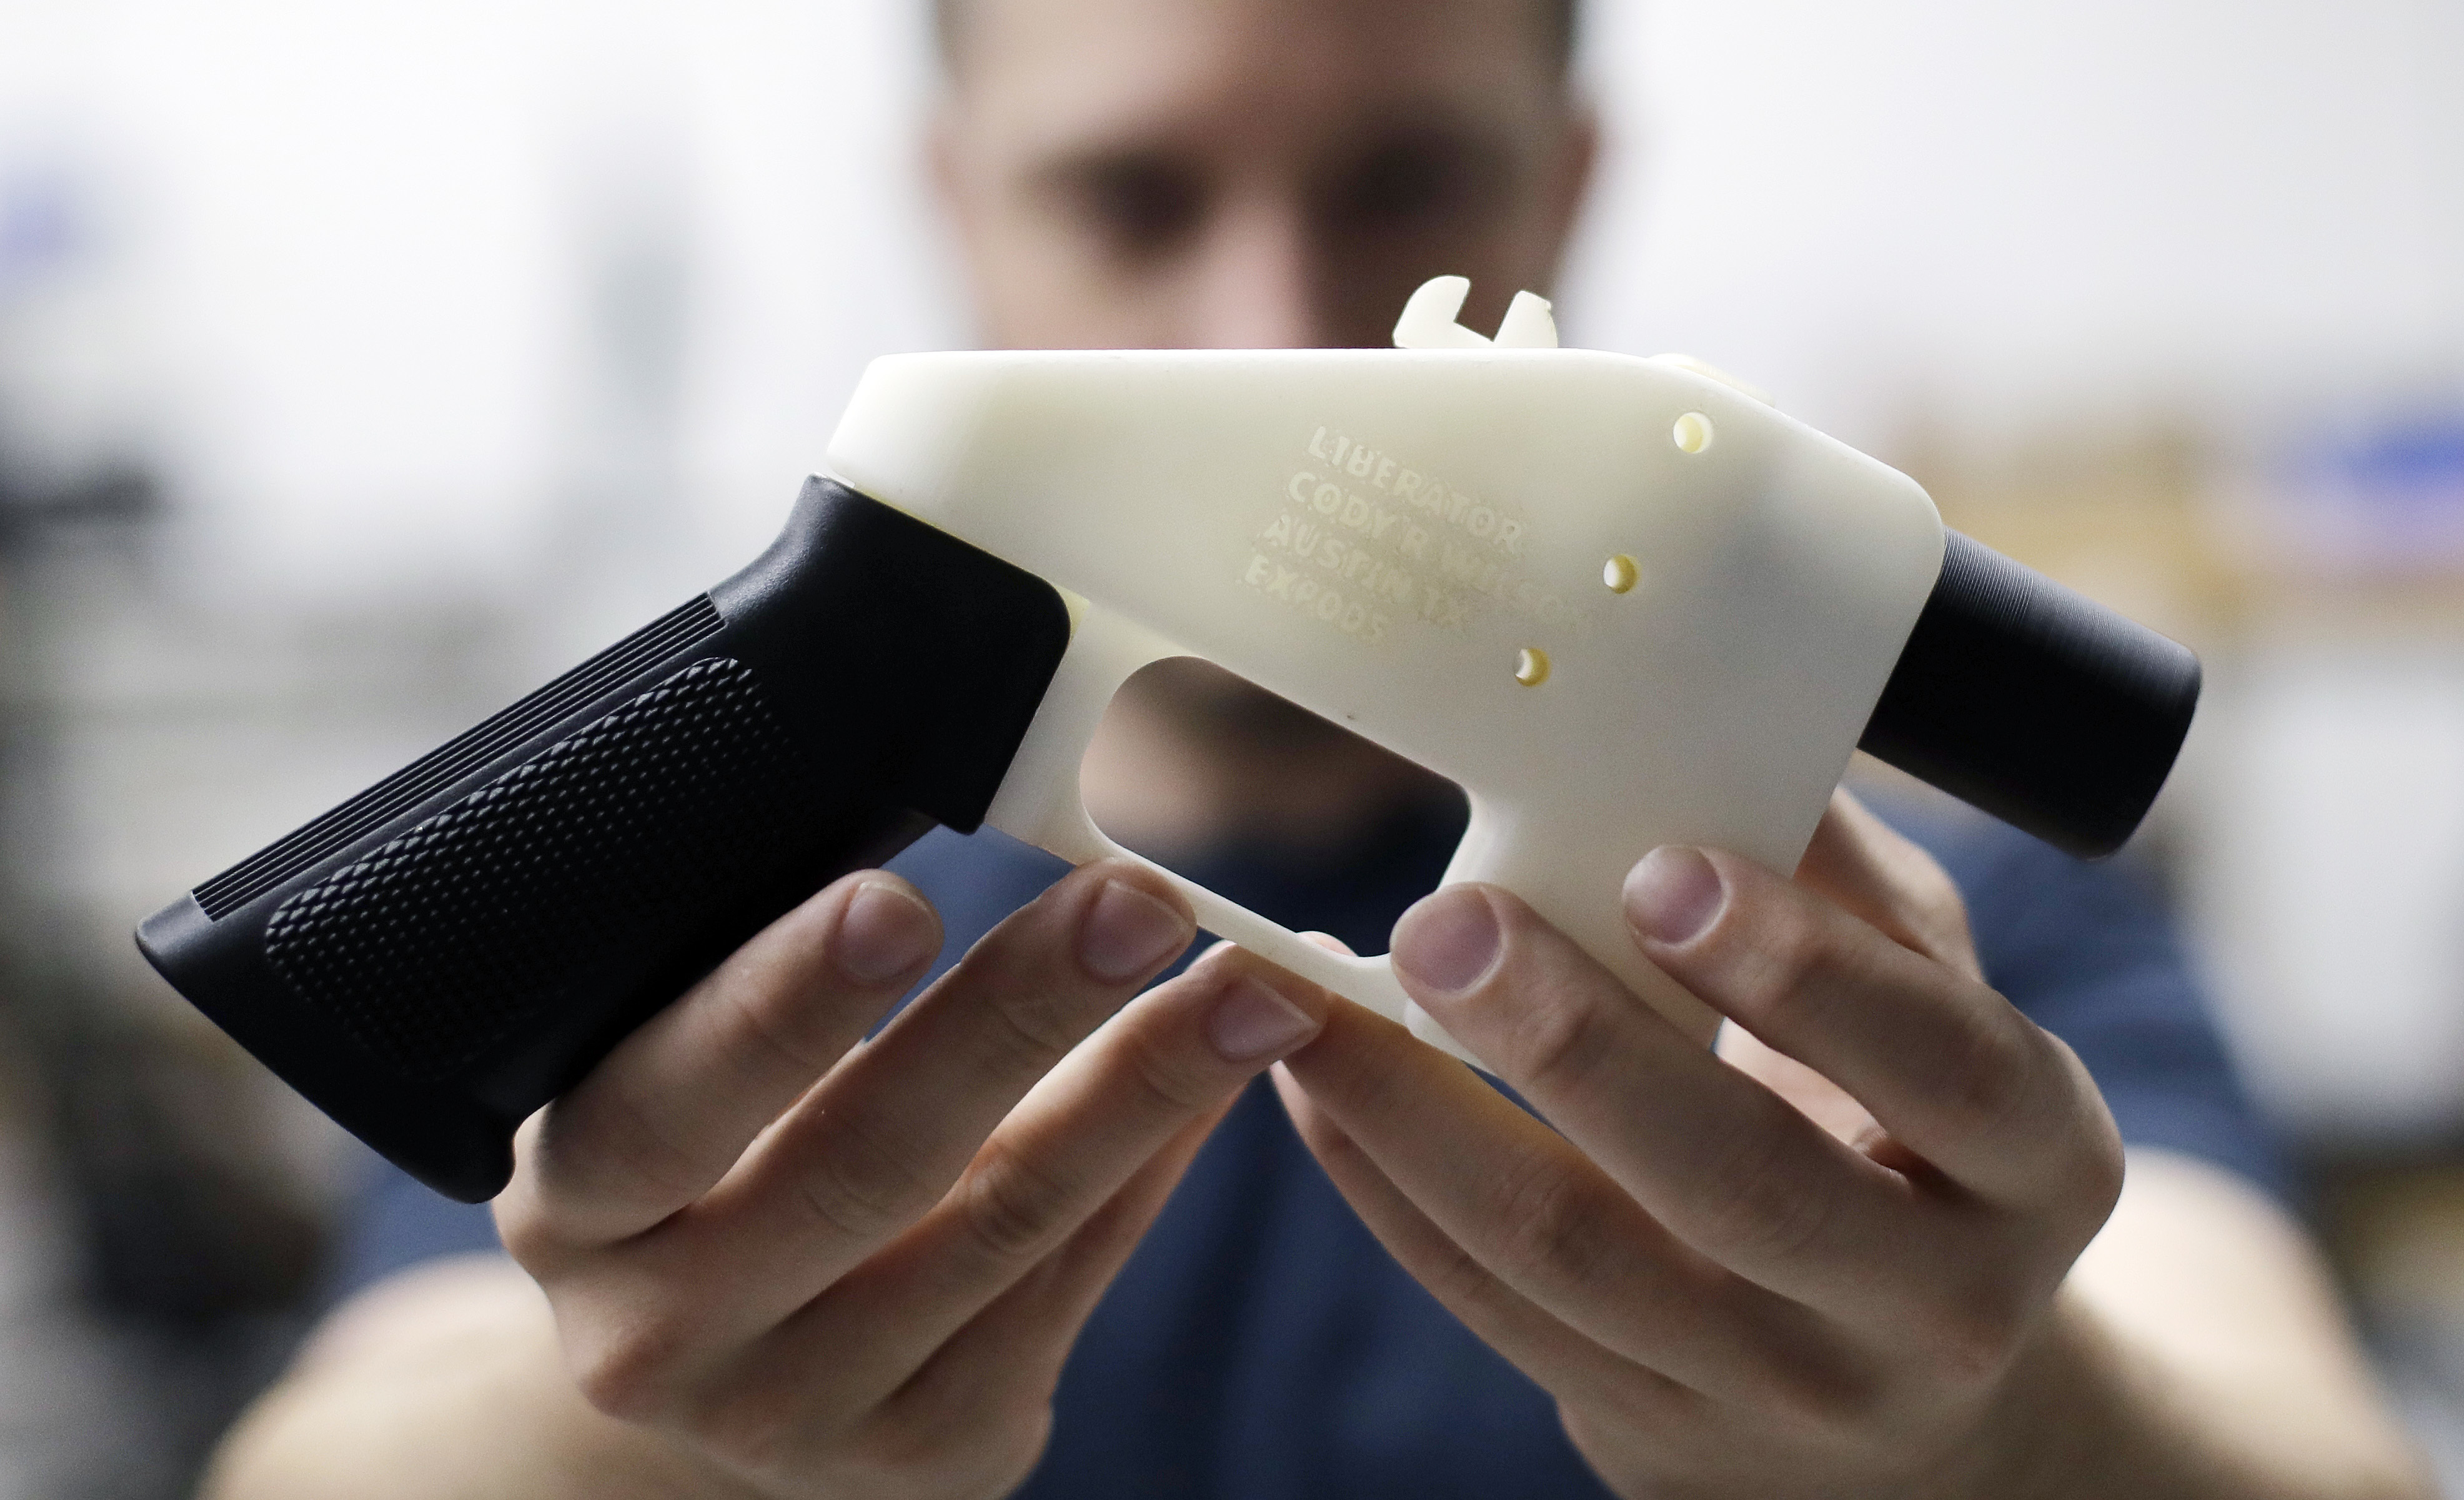 states-are-suing-the-us-government-over-3d-printed-gun-blueprints-mit